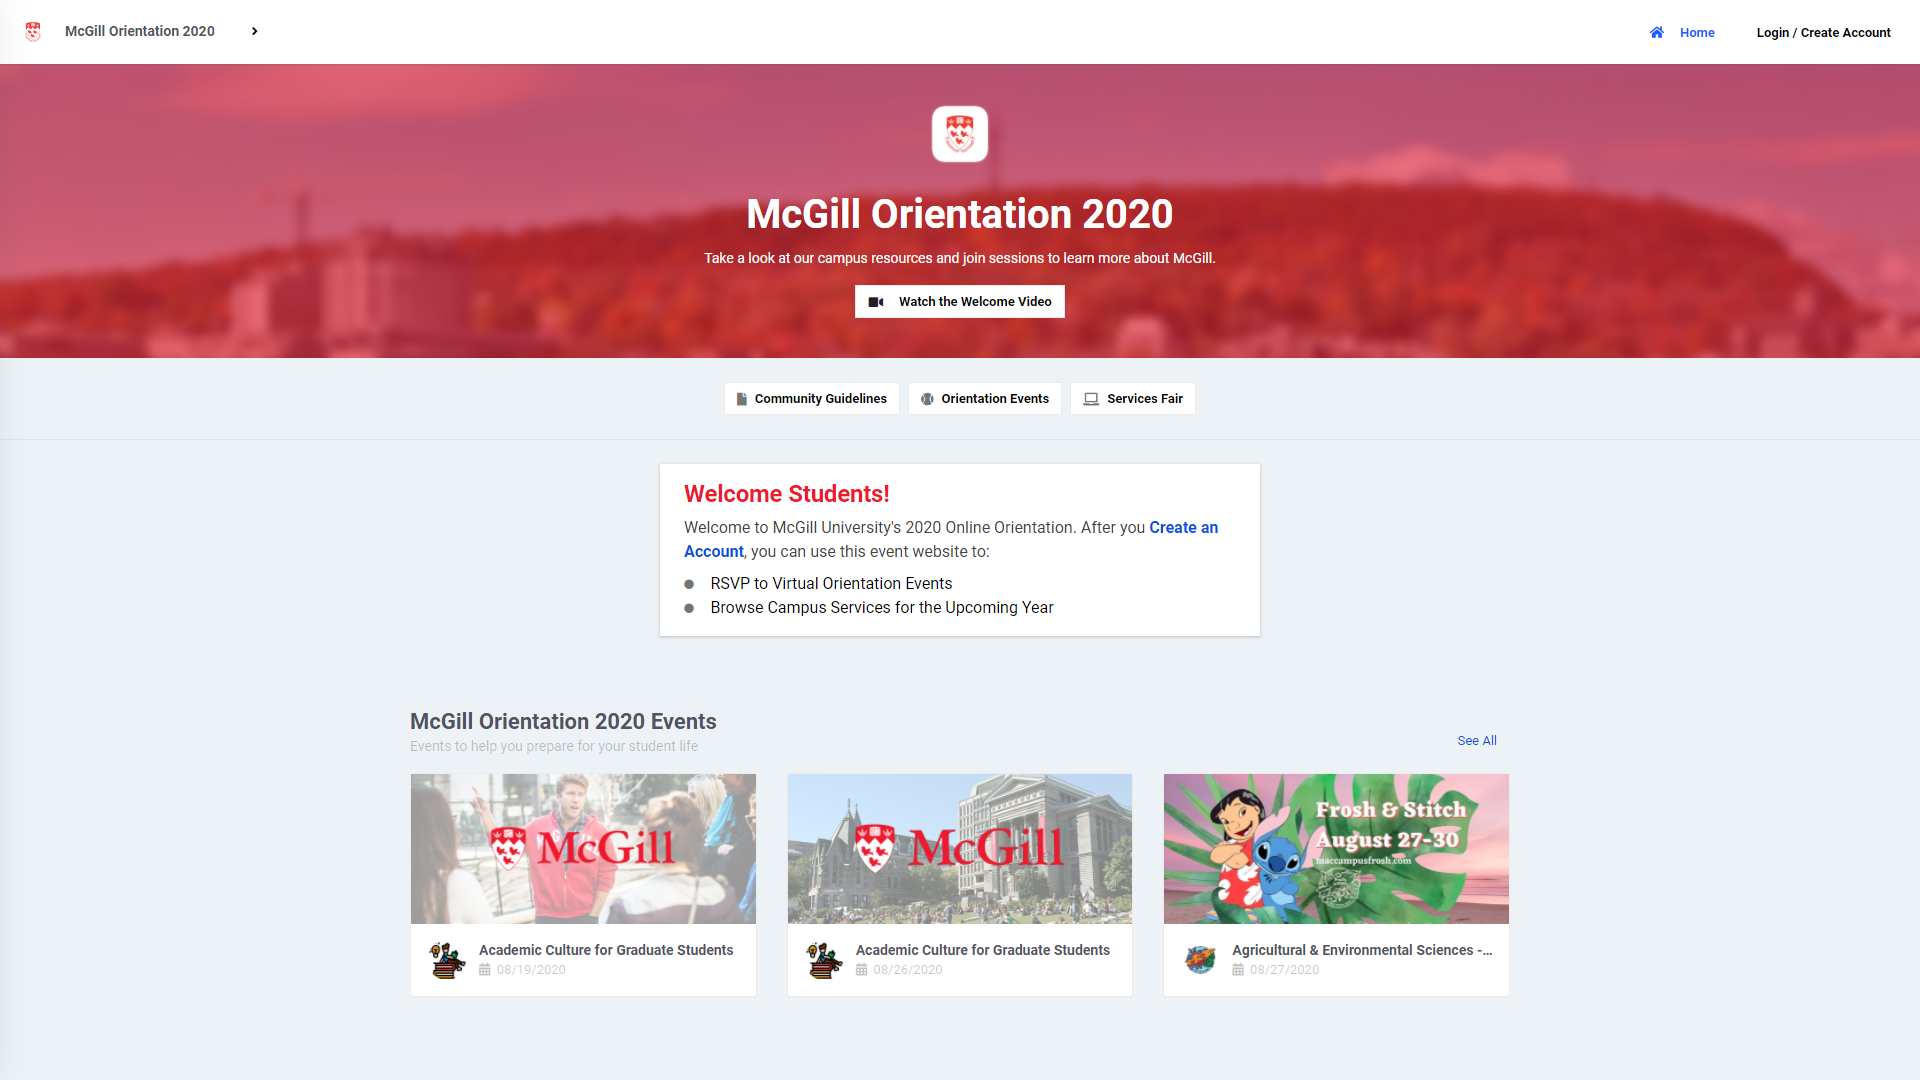 McGill Orientation Events Overview